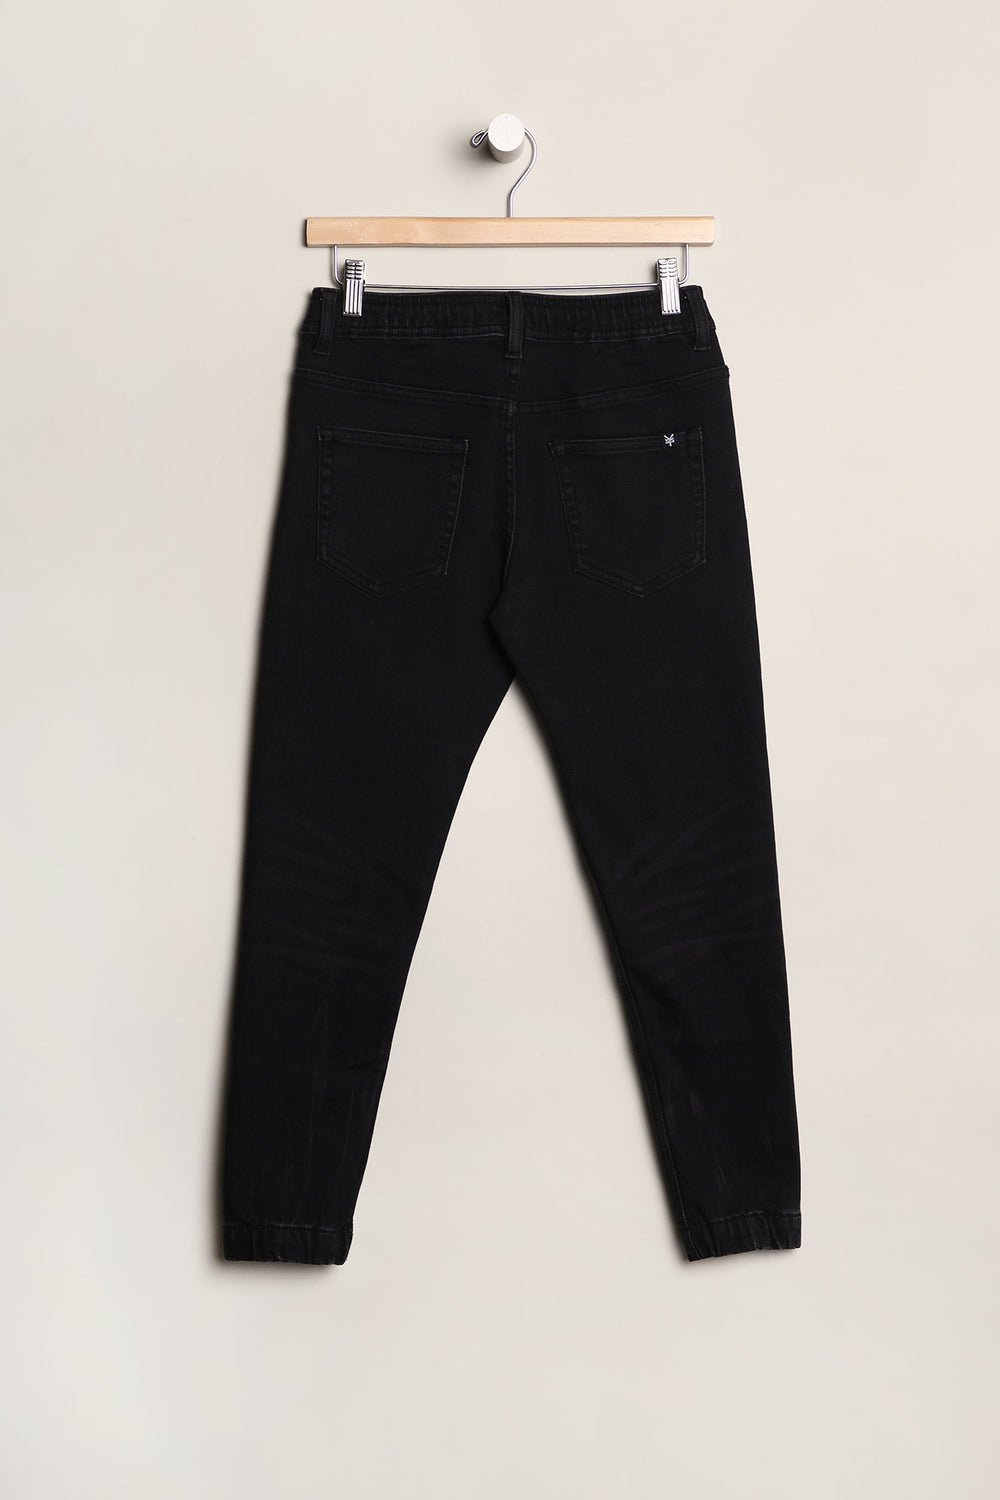 Zoo York Youth Knit Denim Jogger – West49